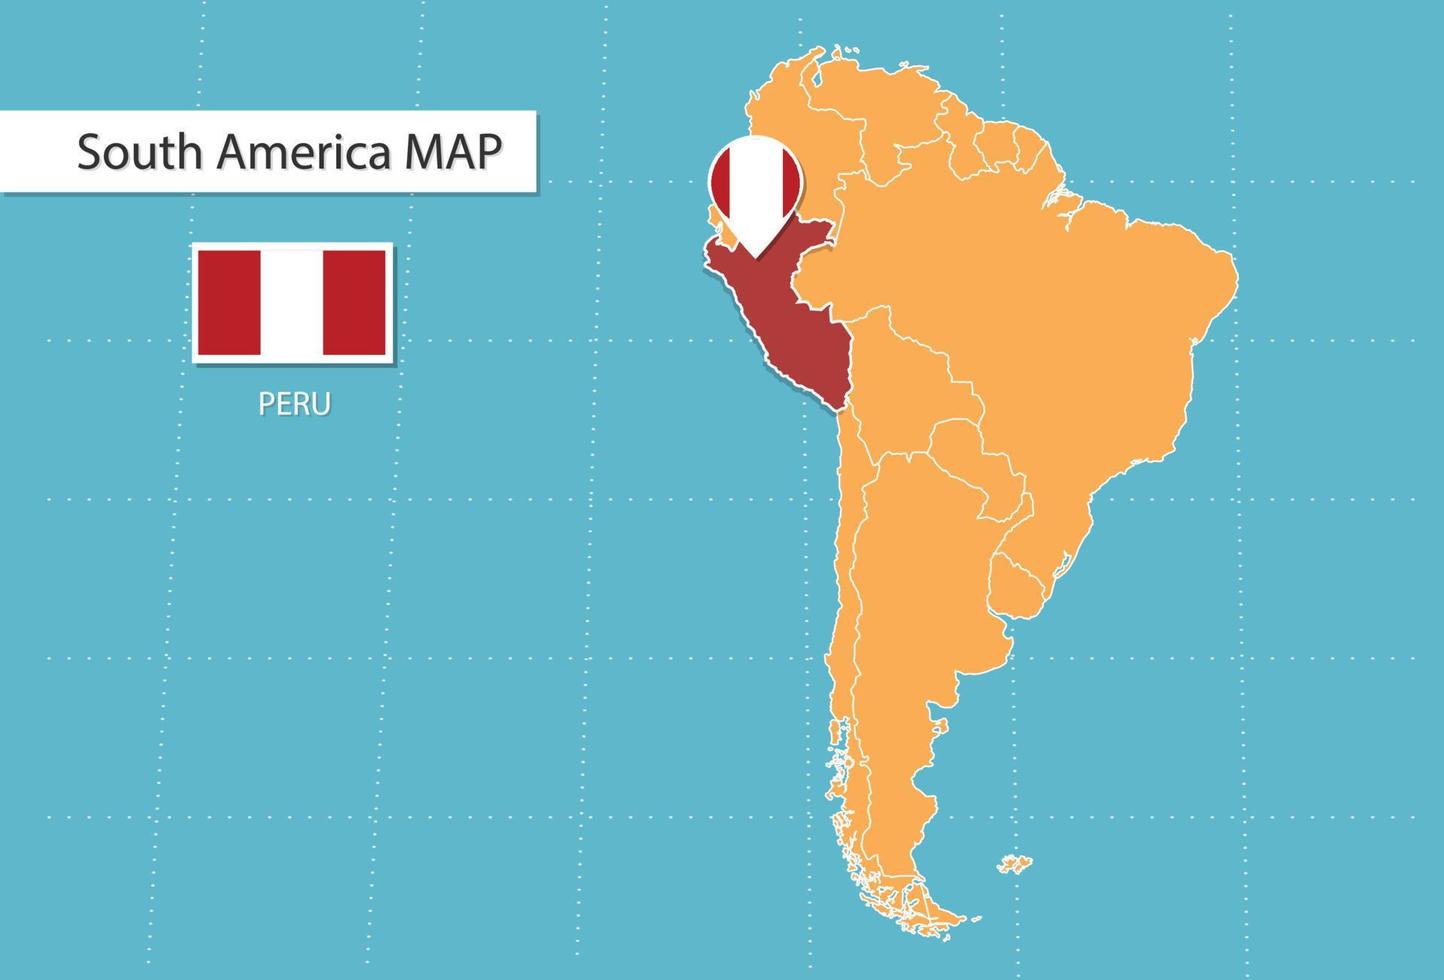 Peru map in America, icons showing Peru location and flags. vector